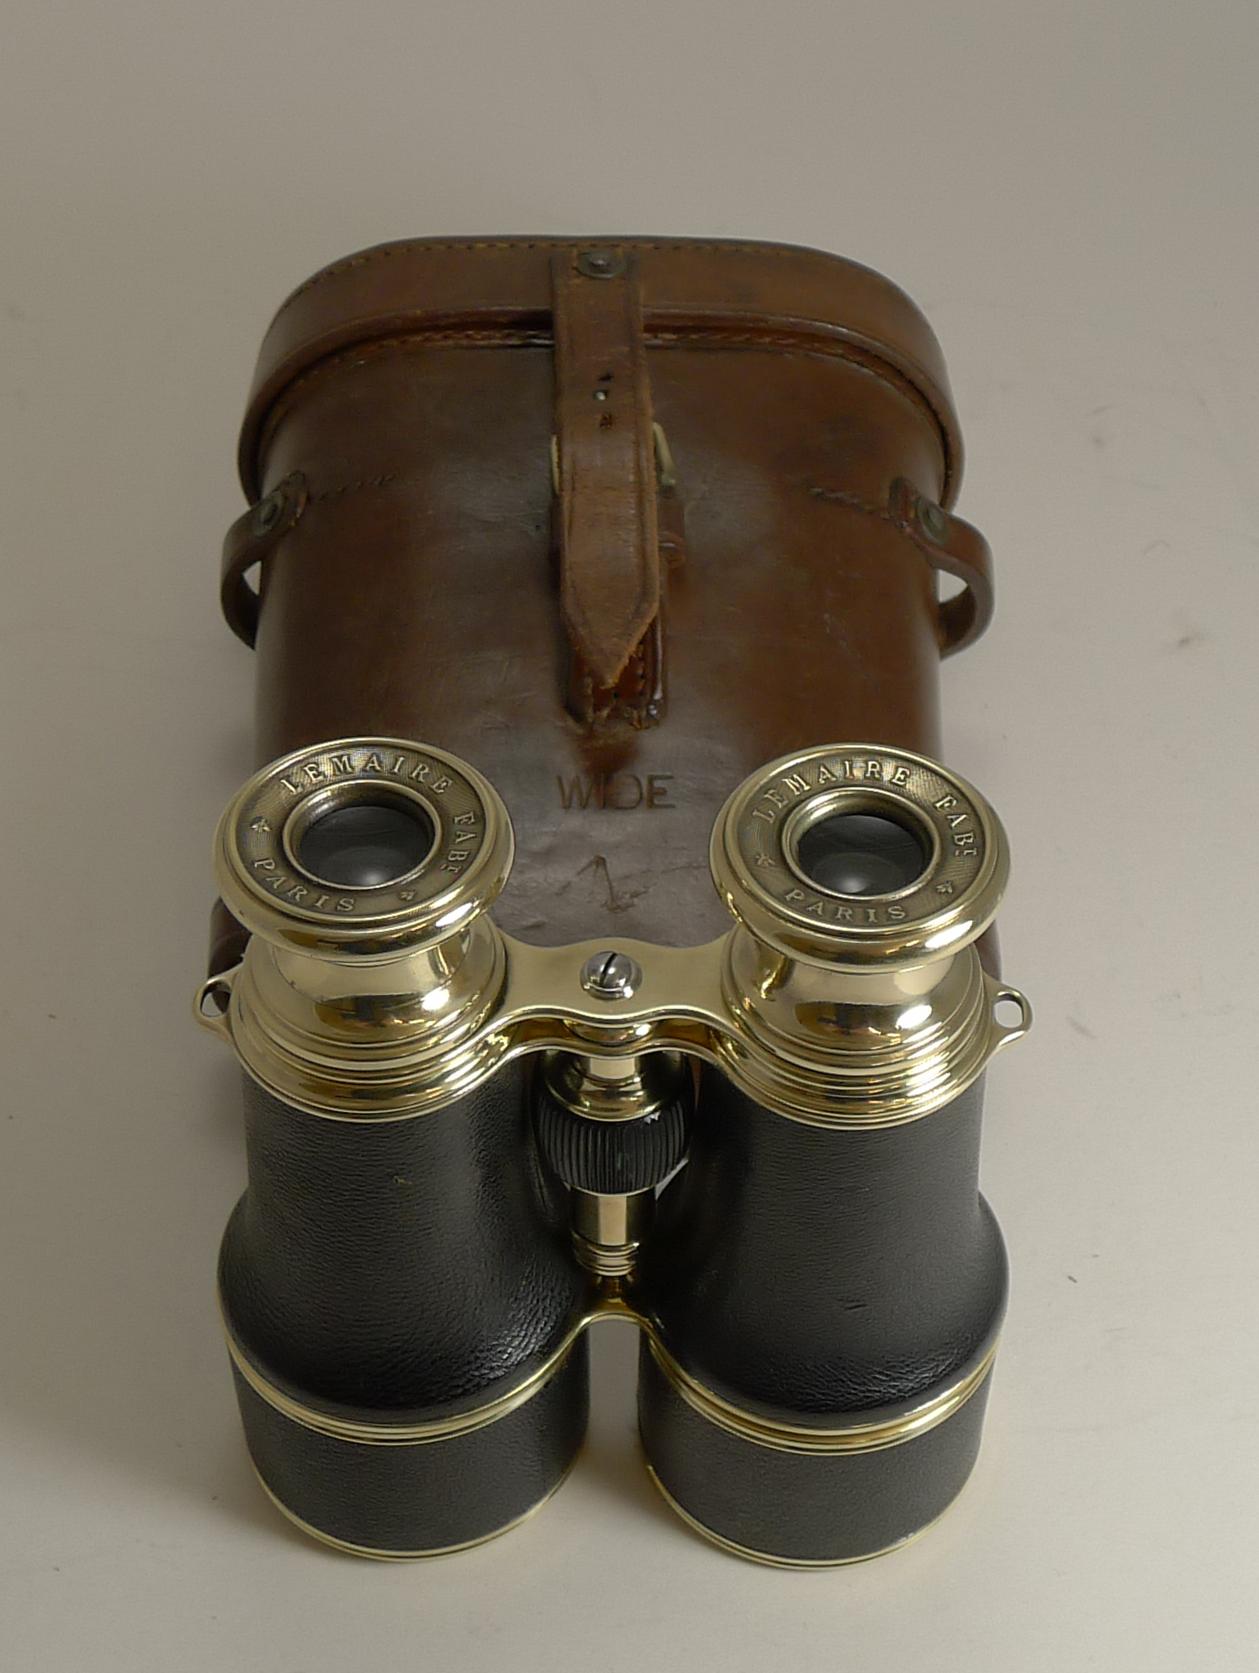 Pair of WWI Binoculars and Case, British Officer's Issue, 1916, LeMaire, Paris 5